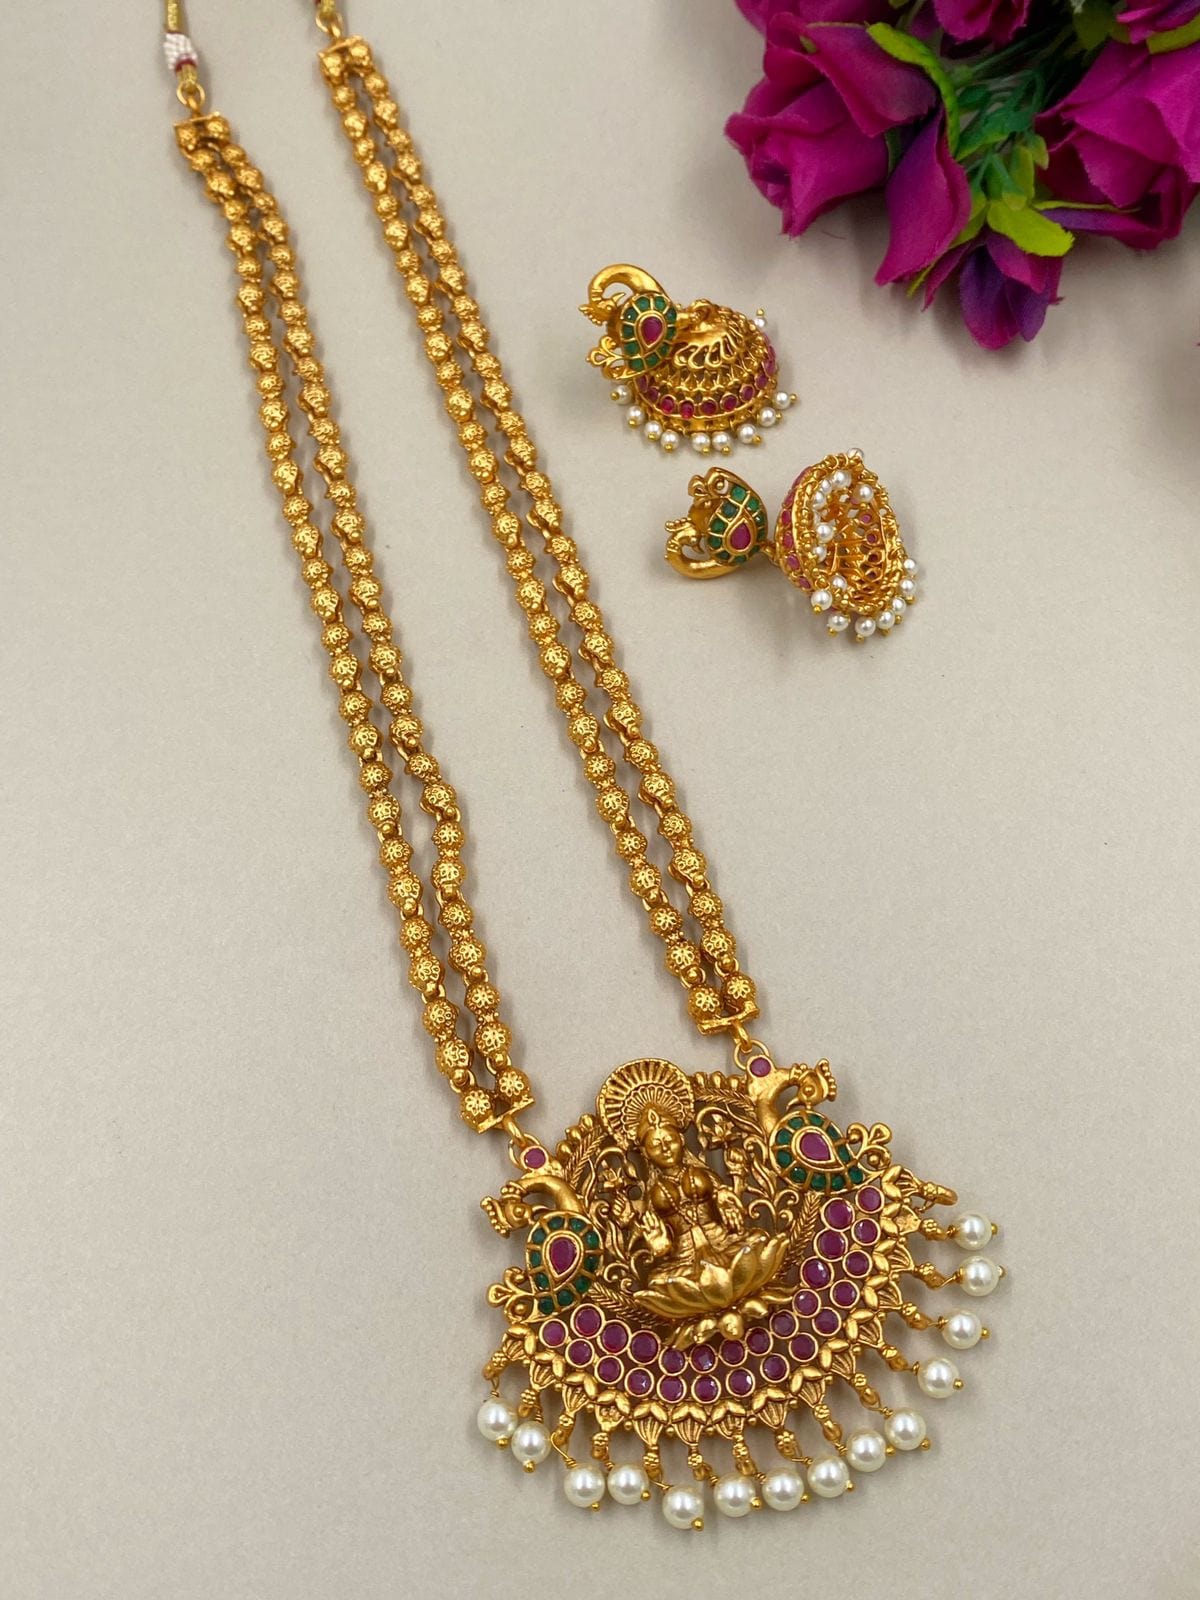 South Indian Goddess Lakshmi Temple Jewelry Necklace For Women Temple Necklace Sets